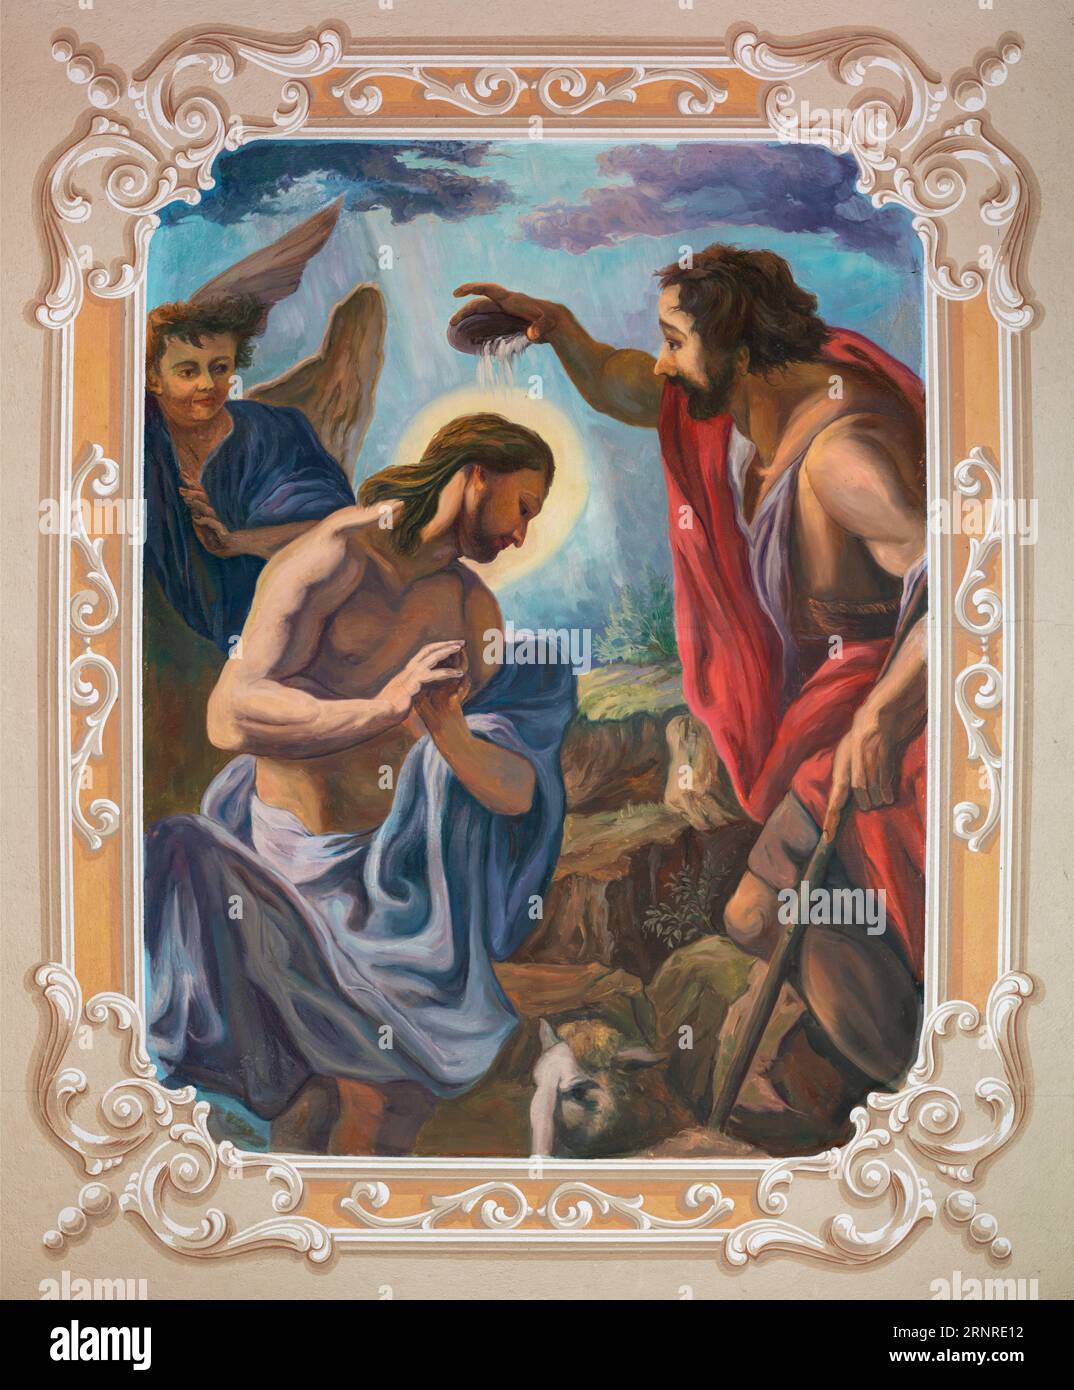 SEBECHLEBY, SLOVAKIA - OKTOBERT 8, 2022: The fresco of Baptism of Christ in St. Michael parish church by Plekanec from 20. cent. Stock Photo